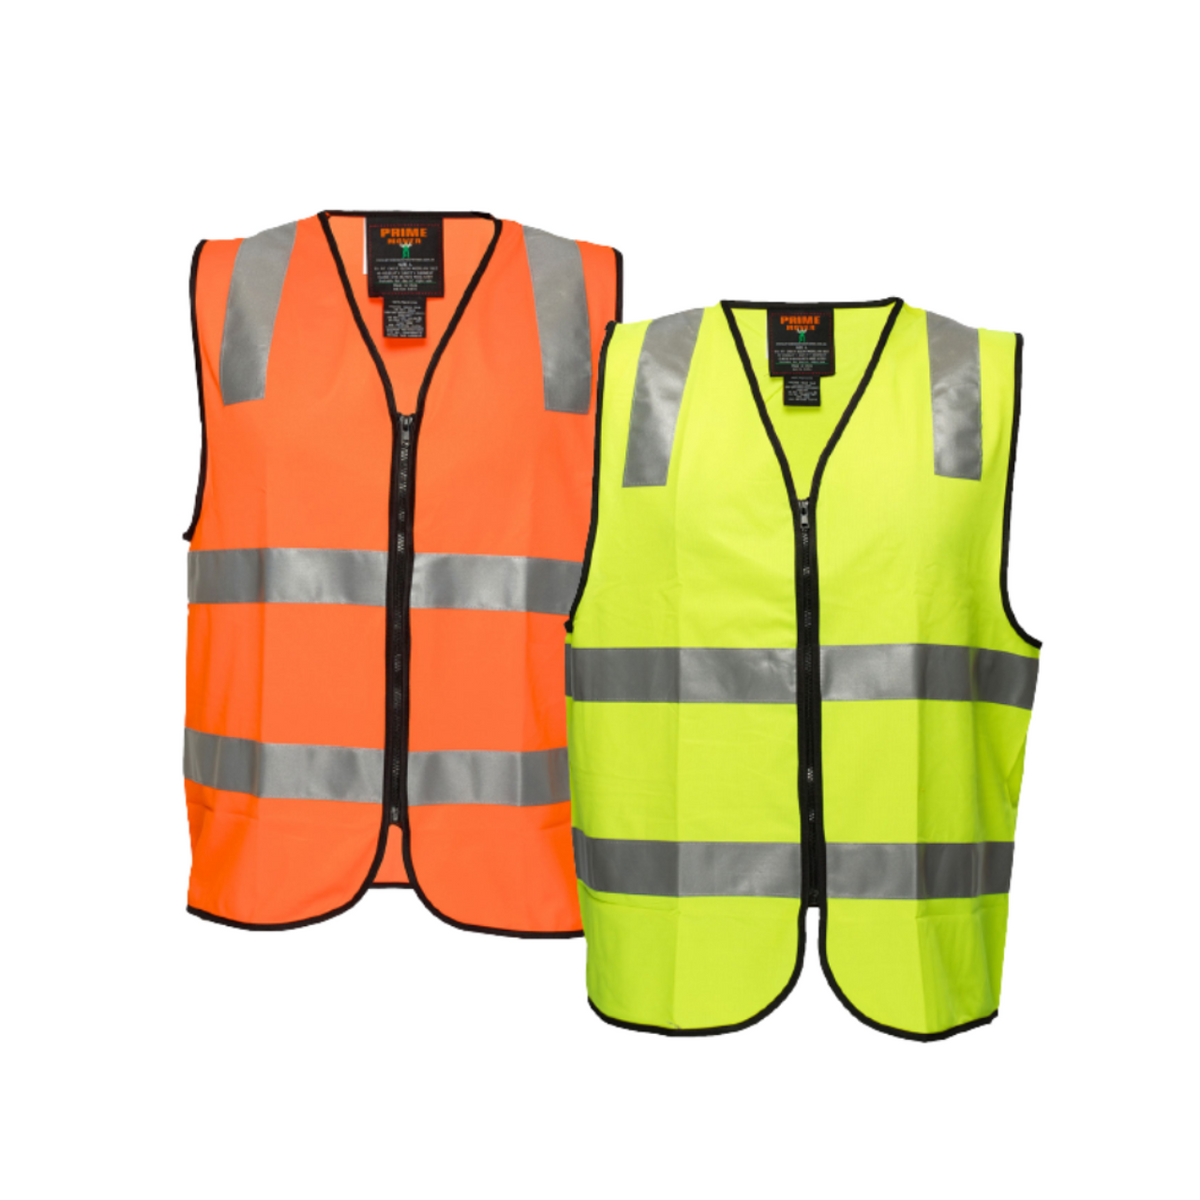 Portwest First Aid Zip Vest D/N Lightweight Reflective Tape Work Safety MZ103-Collins Clothing Co